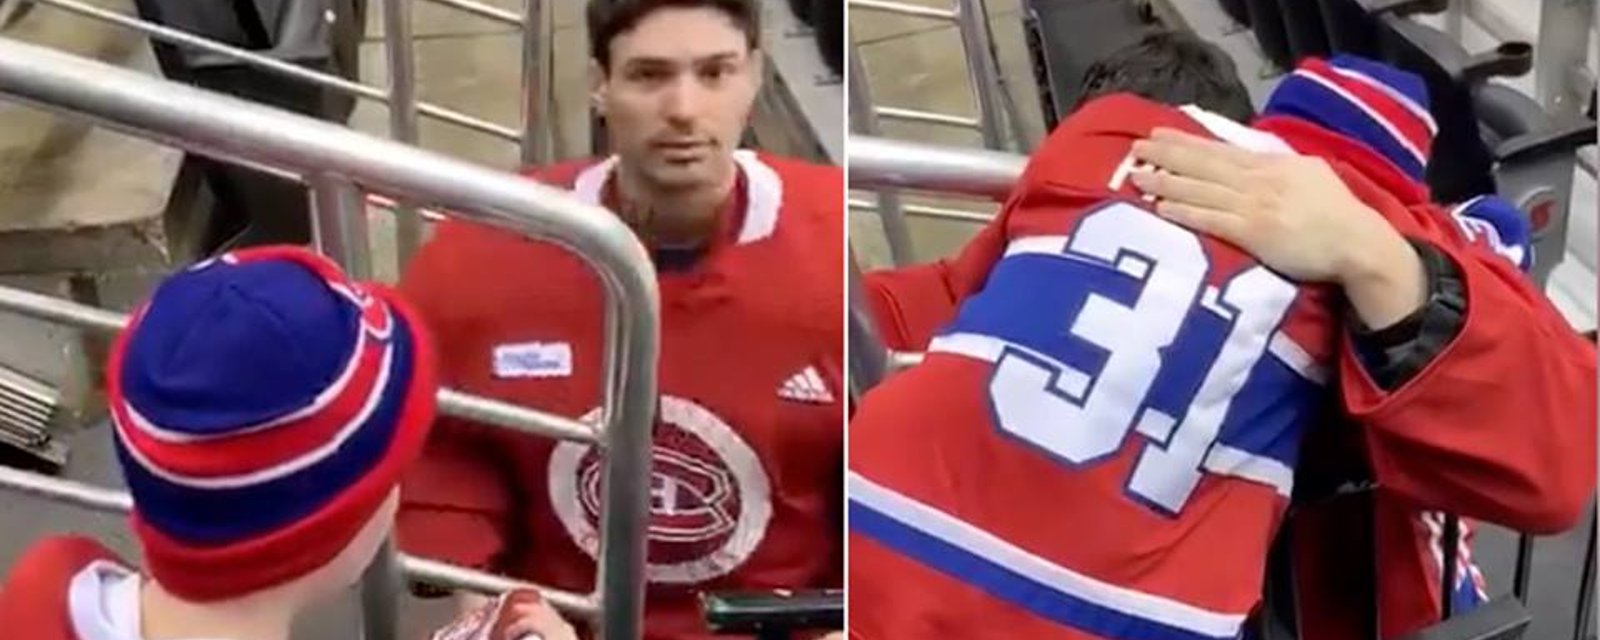 Young boy who lost his mother to cancer gets a chance to meet his hero Carey Price